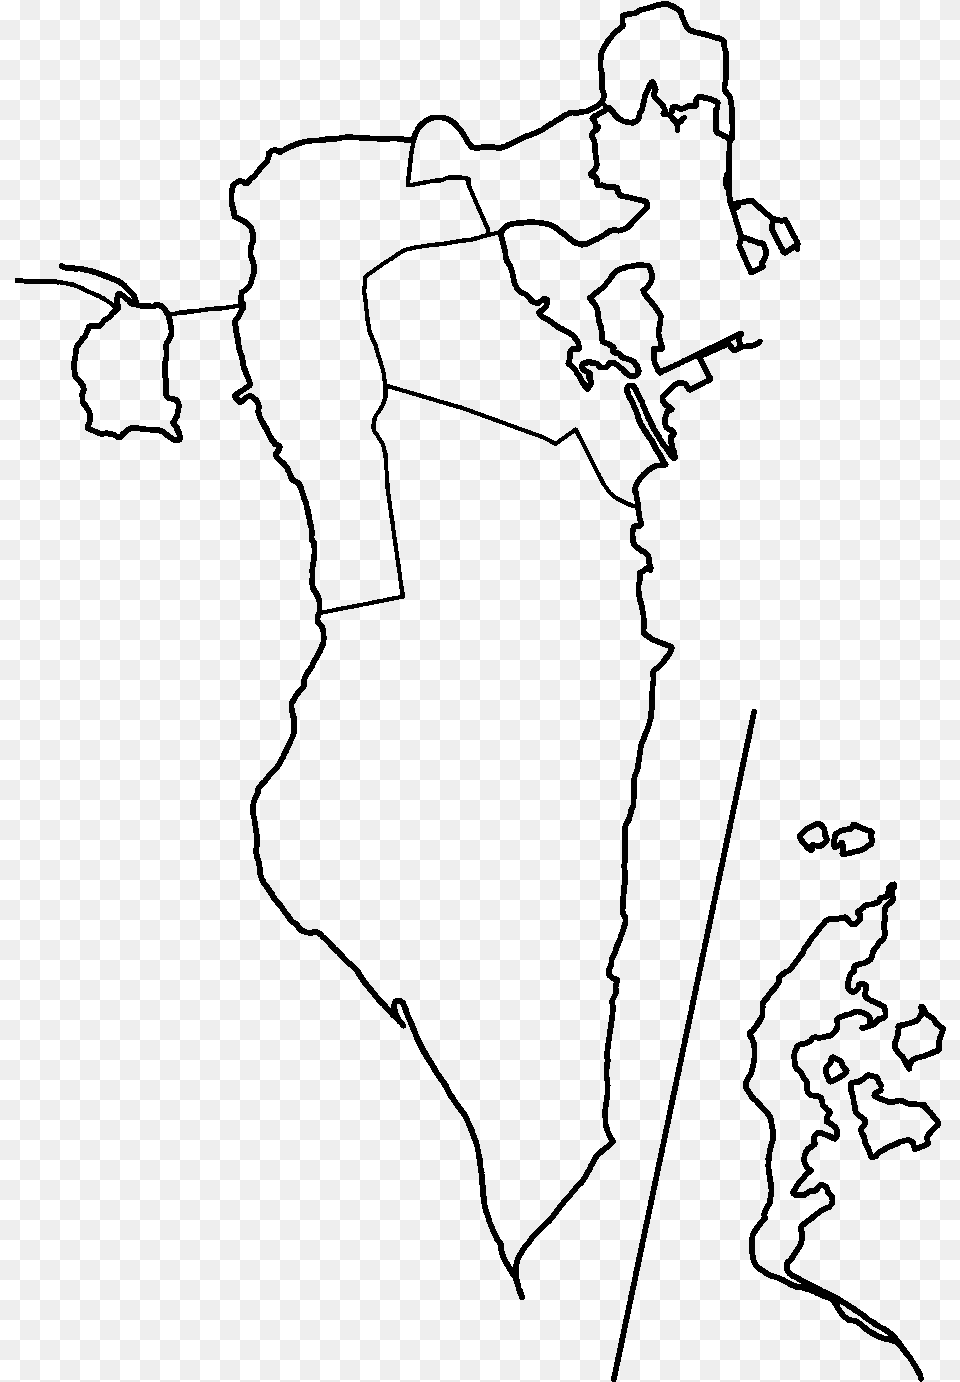 Bahrain Governorates Blank Plain Map Of Bahrain, Gray Free Png